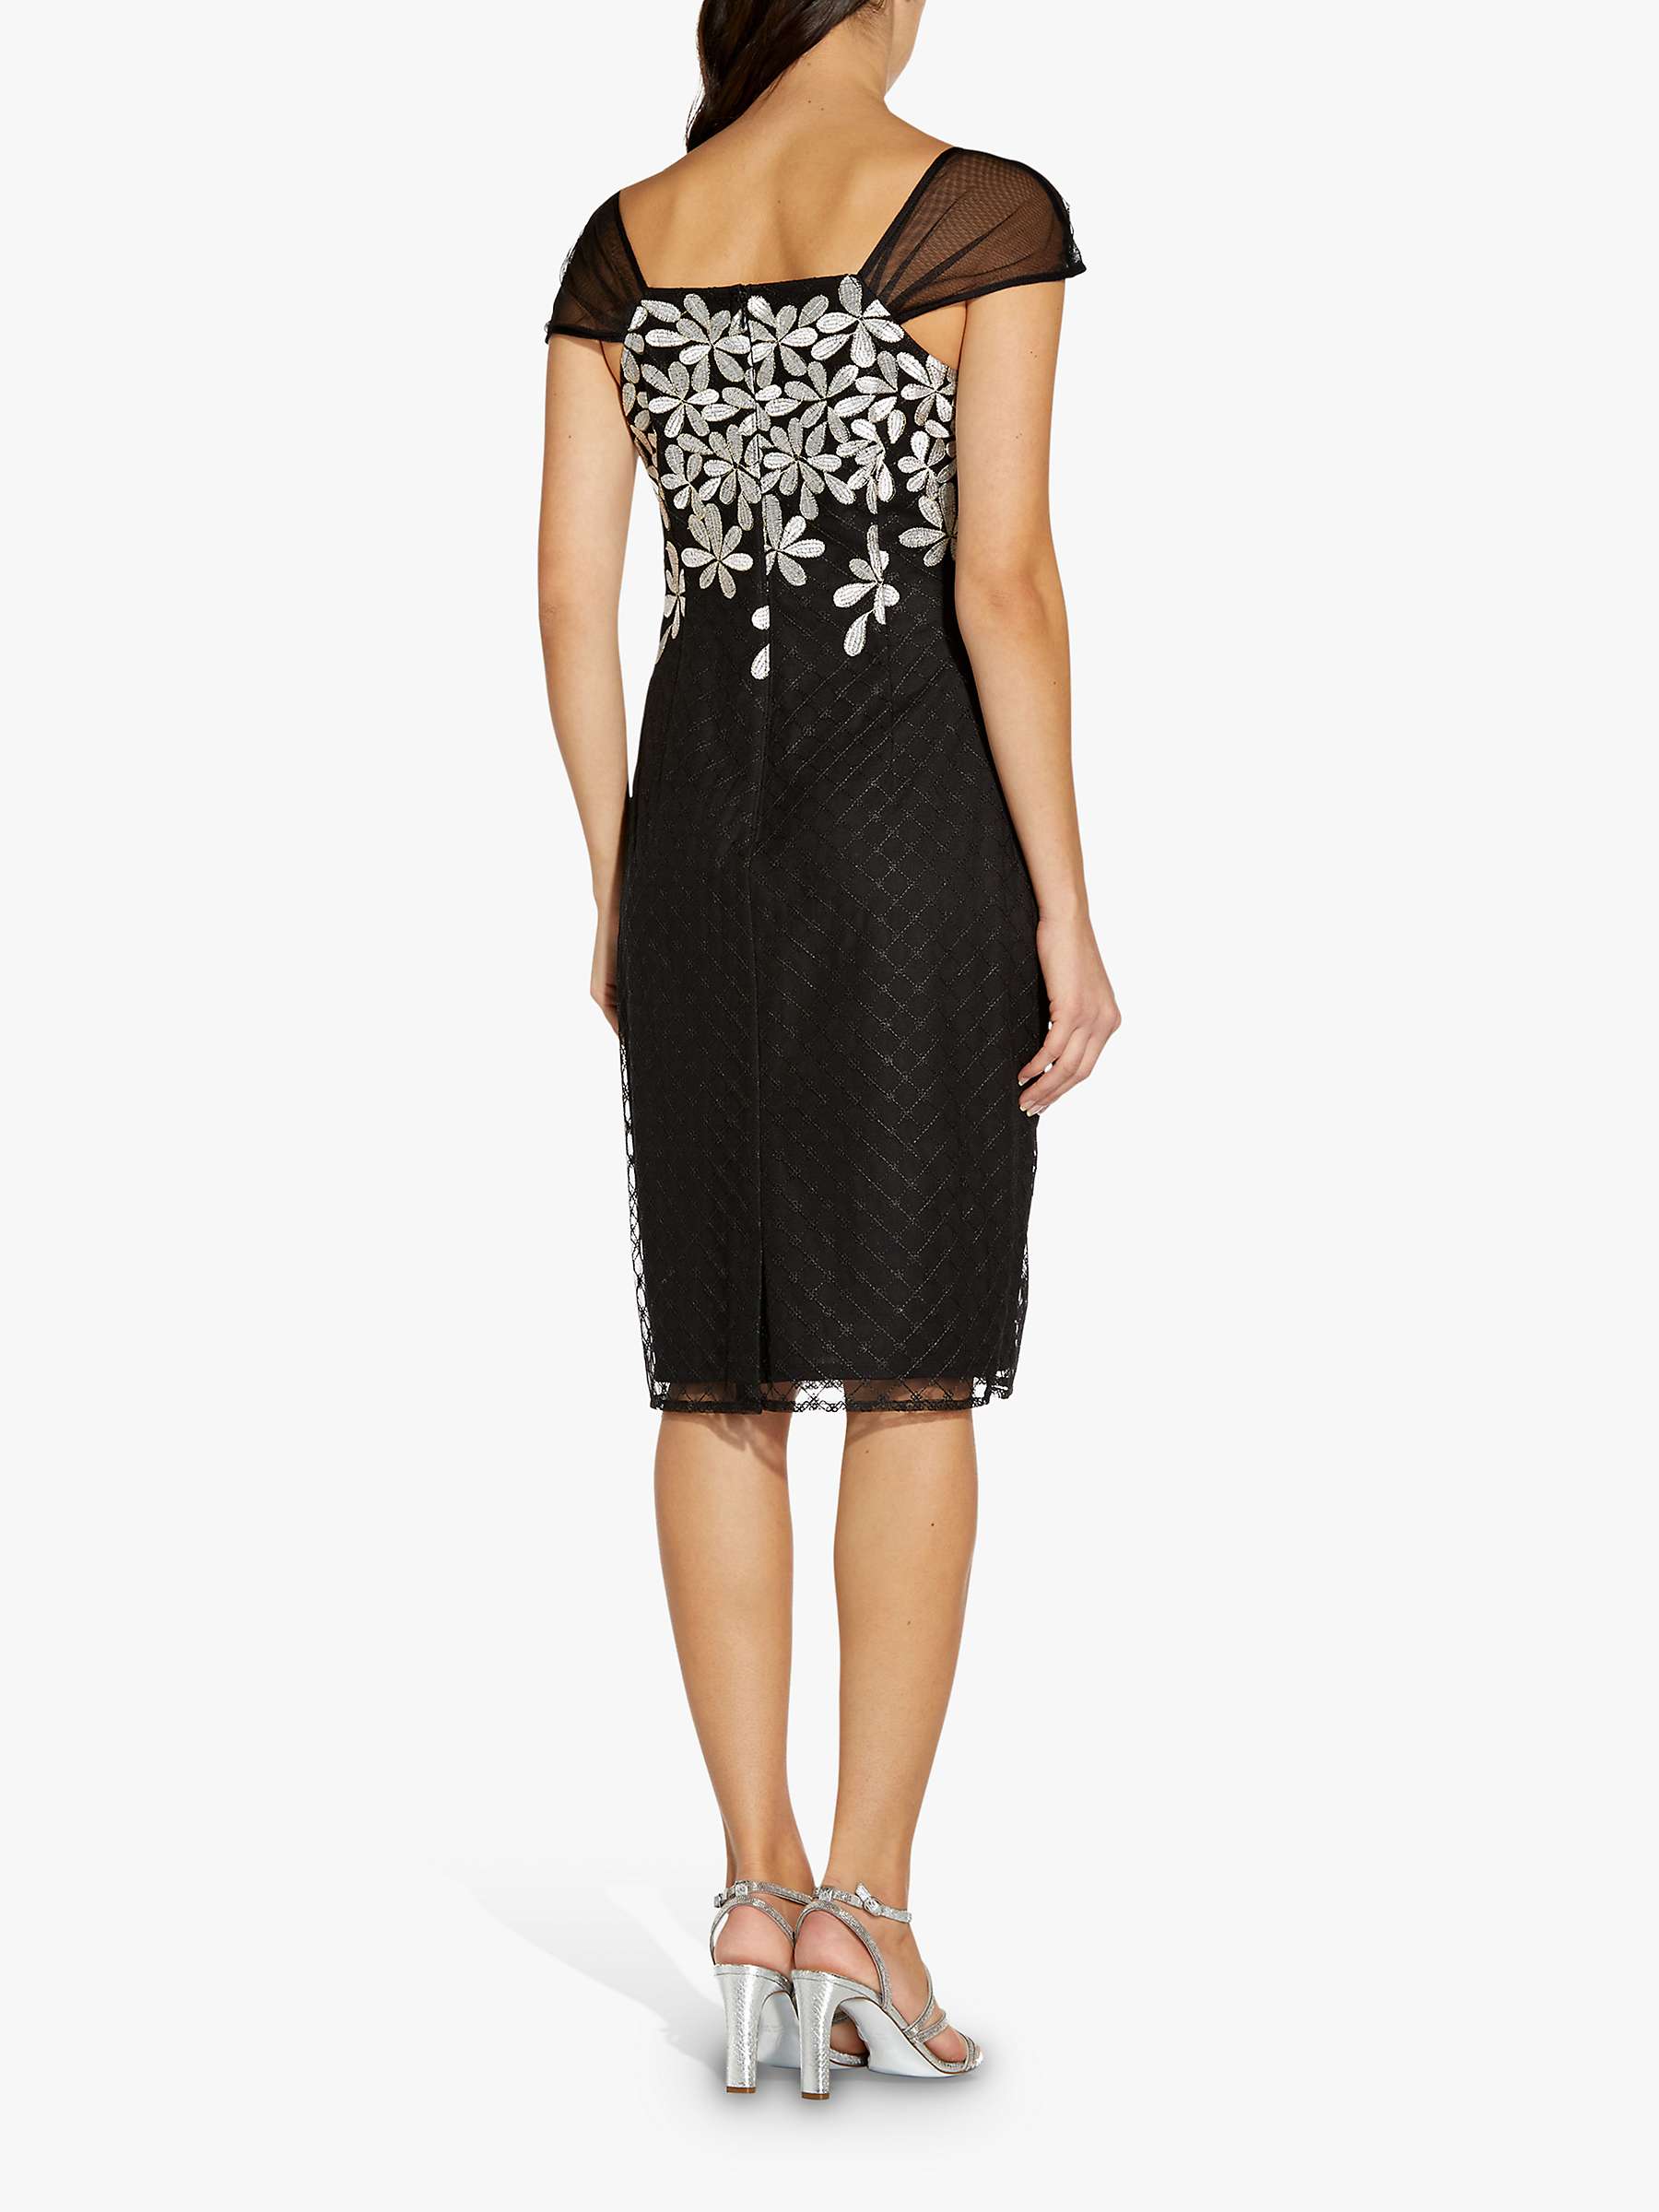 Buy Adrianna Papell Floral Sheath Dress, Black/Ivory Online at johnlewis.com